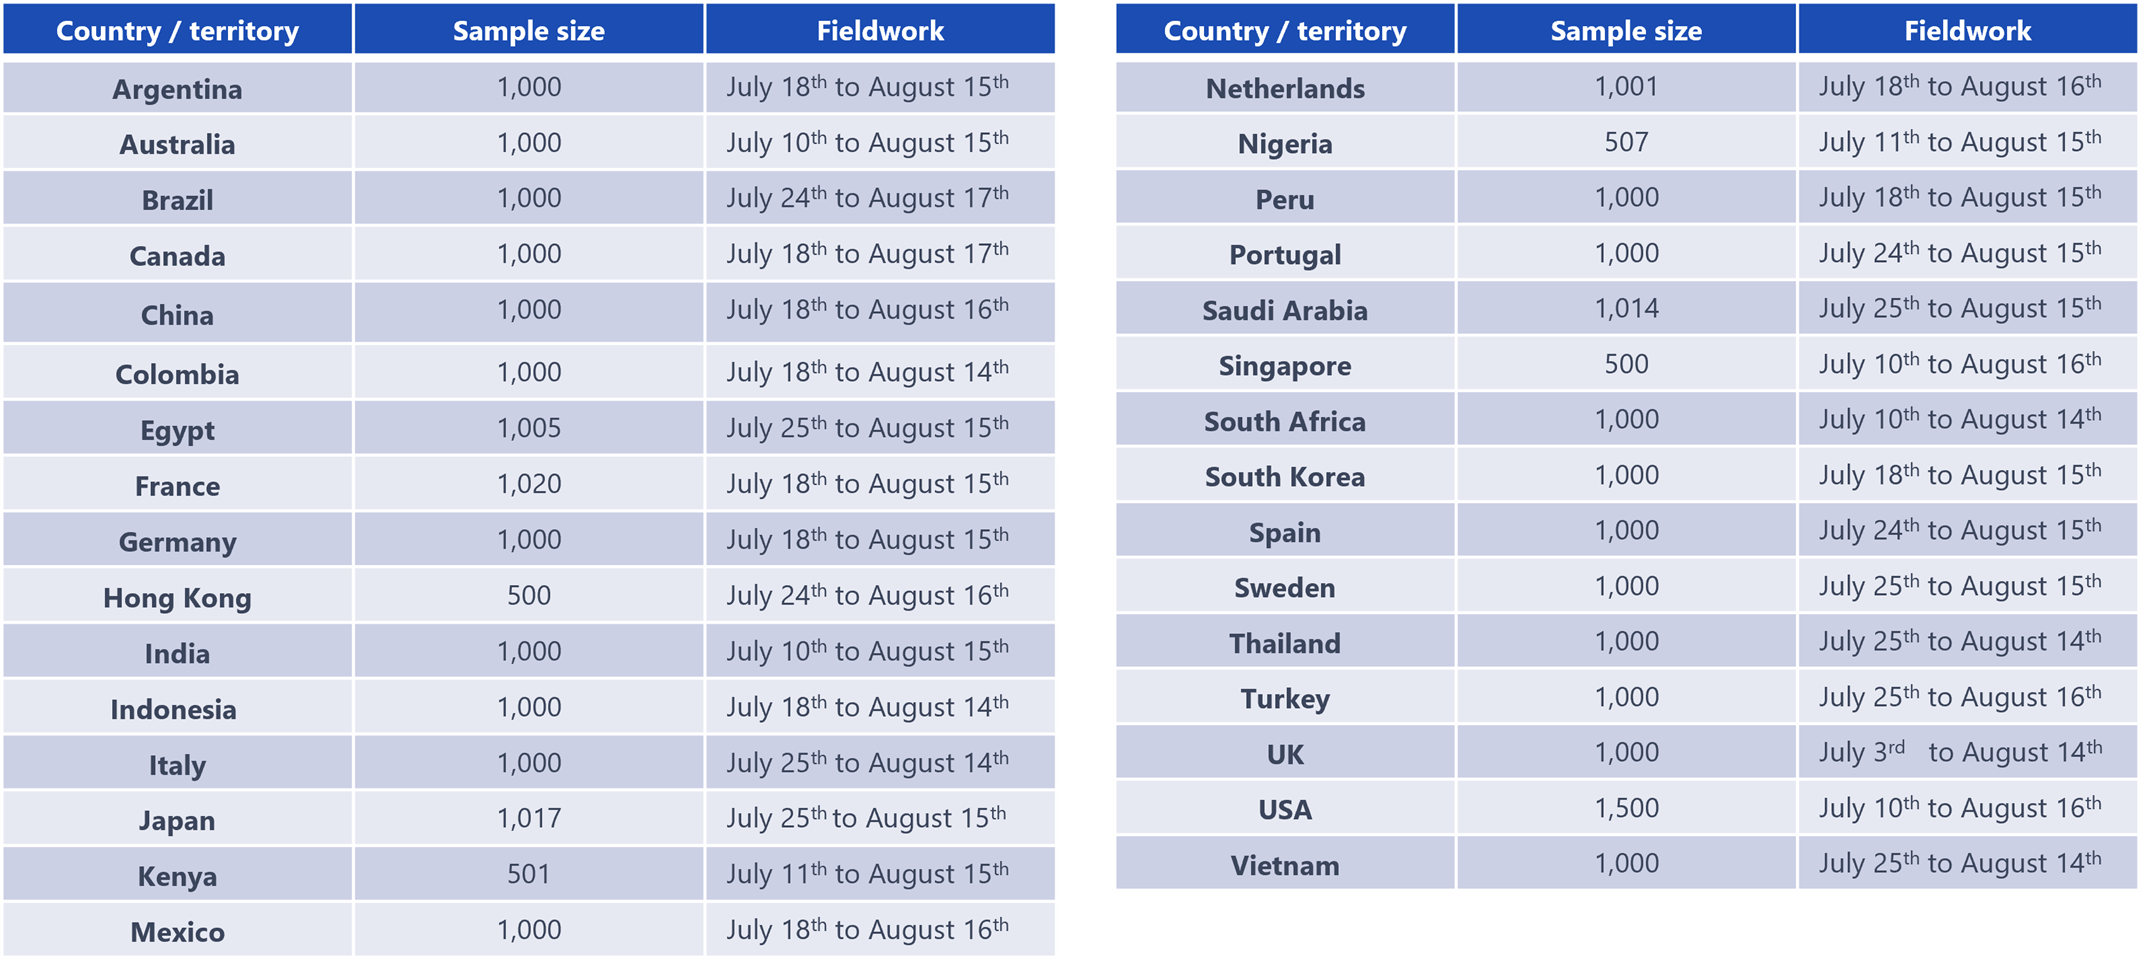 table showing surveyed countries, sample size, and fieldwork dates about awareness of the SDGs